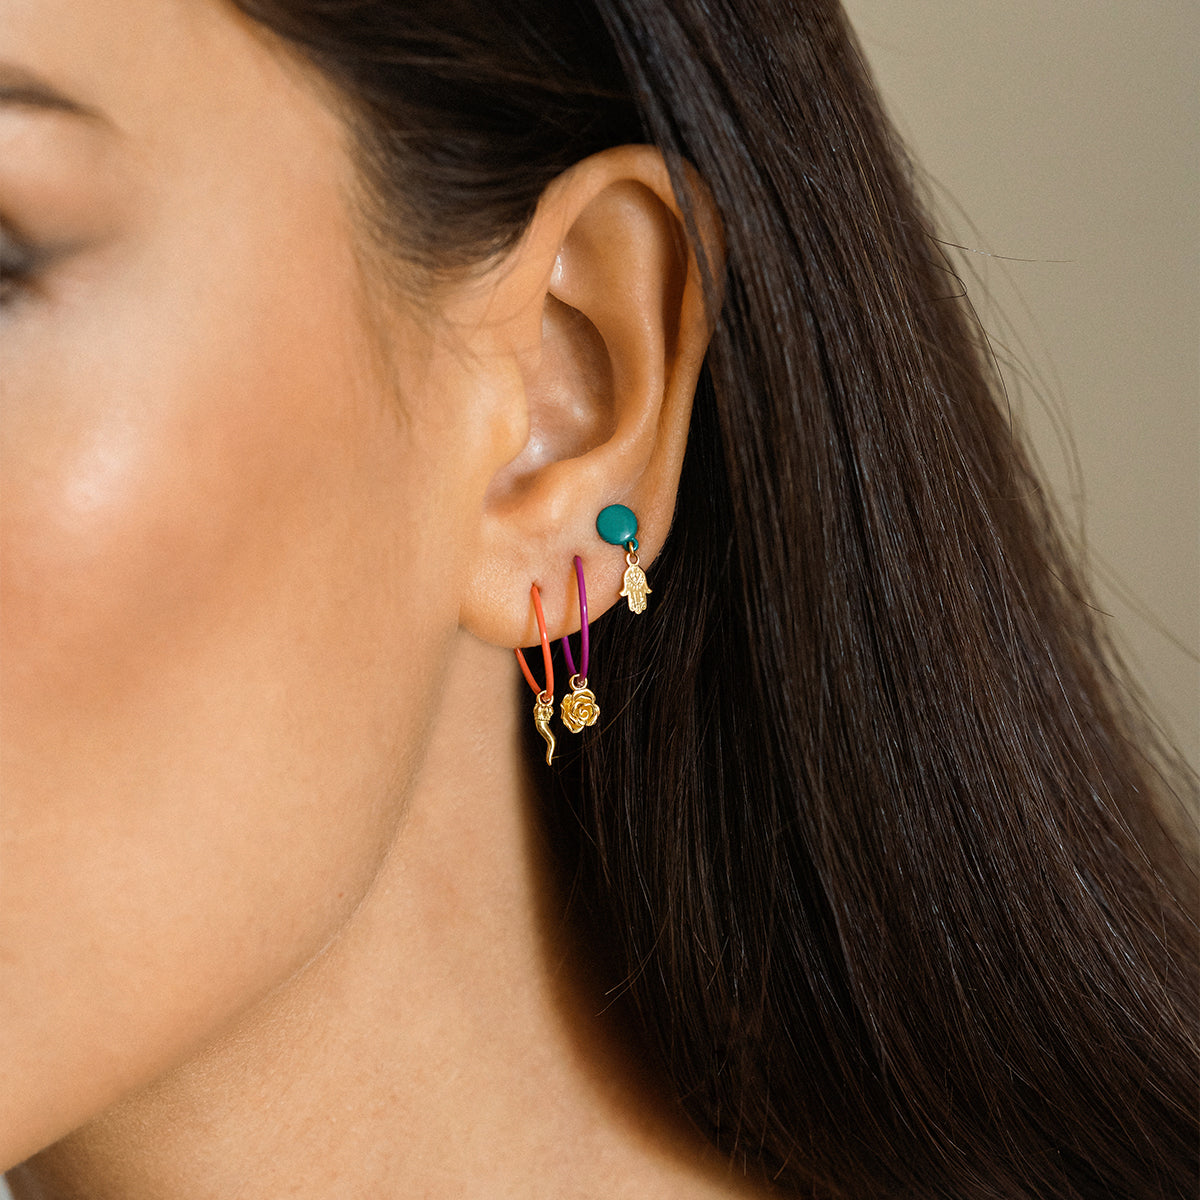 Earrings - Single earring with hand of fatima and painted button - ORO18KT - 2 | Rue des Mille